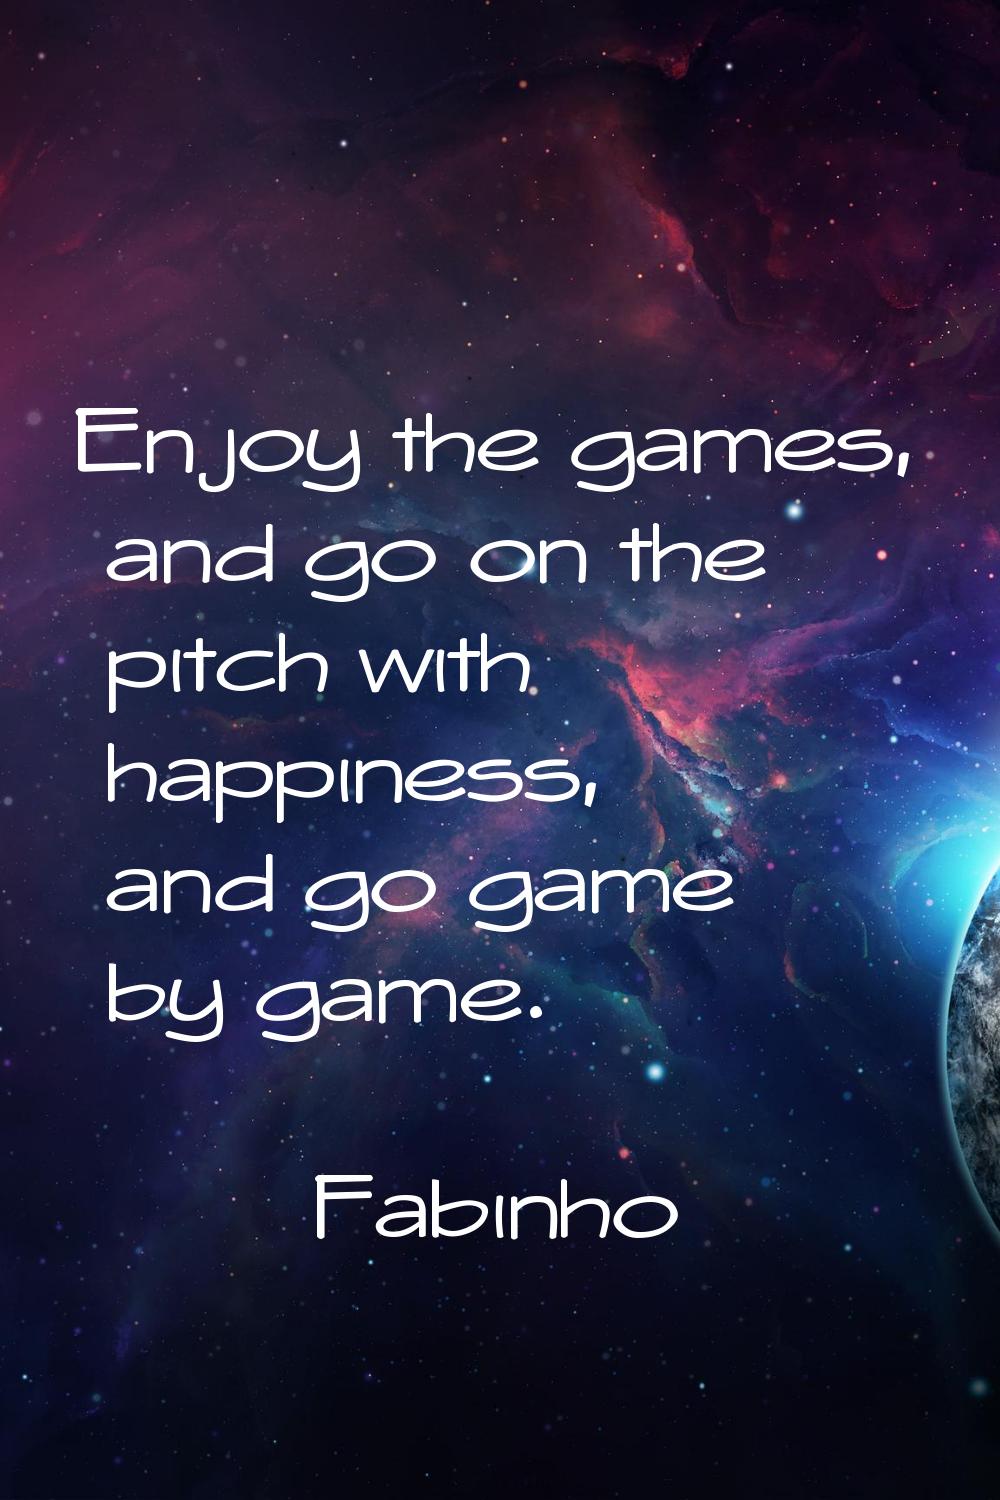 Enjoy the games, and go on the pitch with happiness, and go game by game.